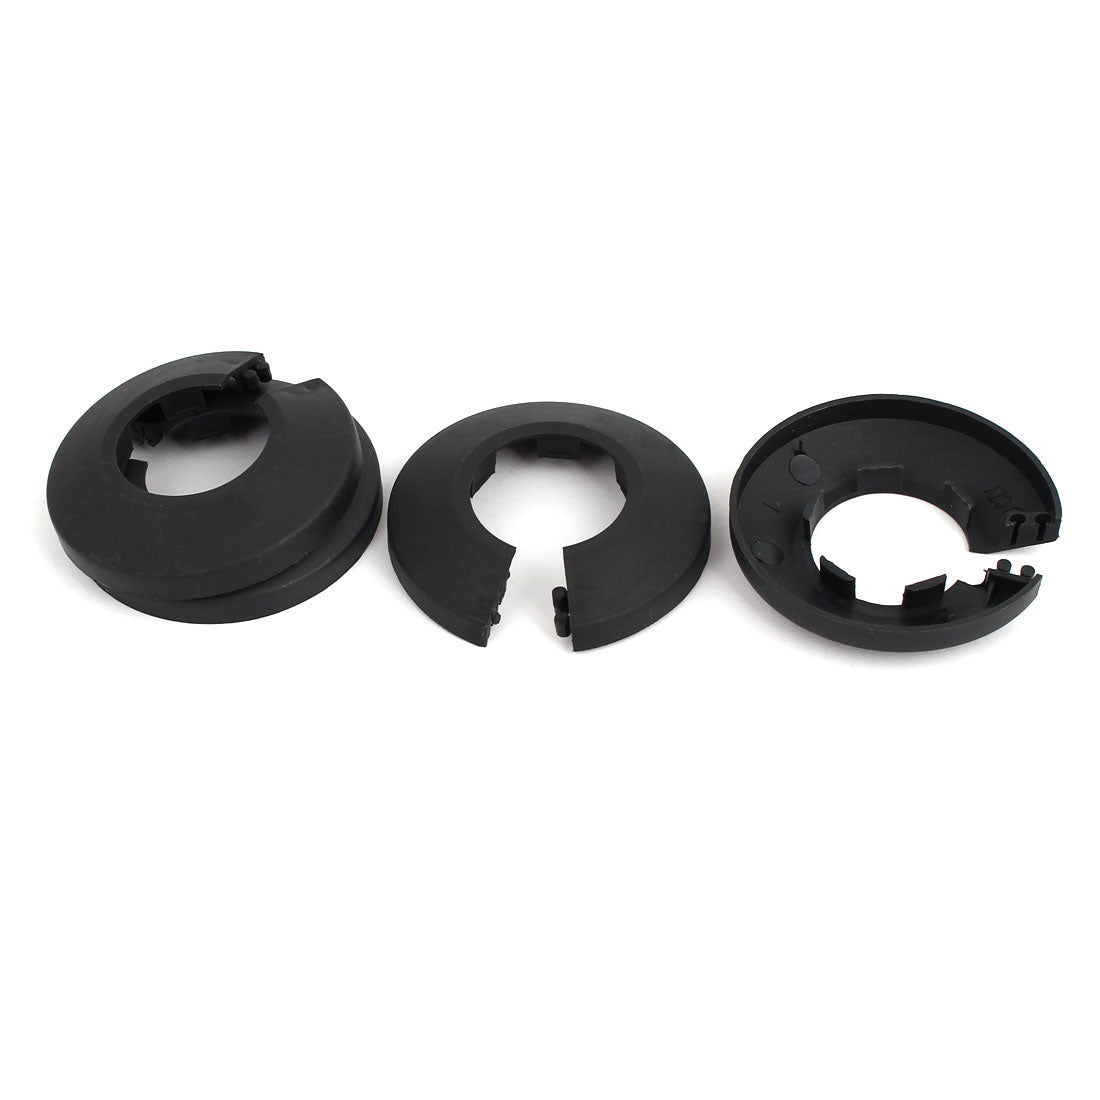 uxcell Uxcell 25mm Plastic Wall Flange Radiator Water Pipe Cover  Black 4pcs